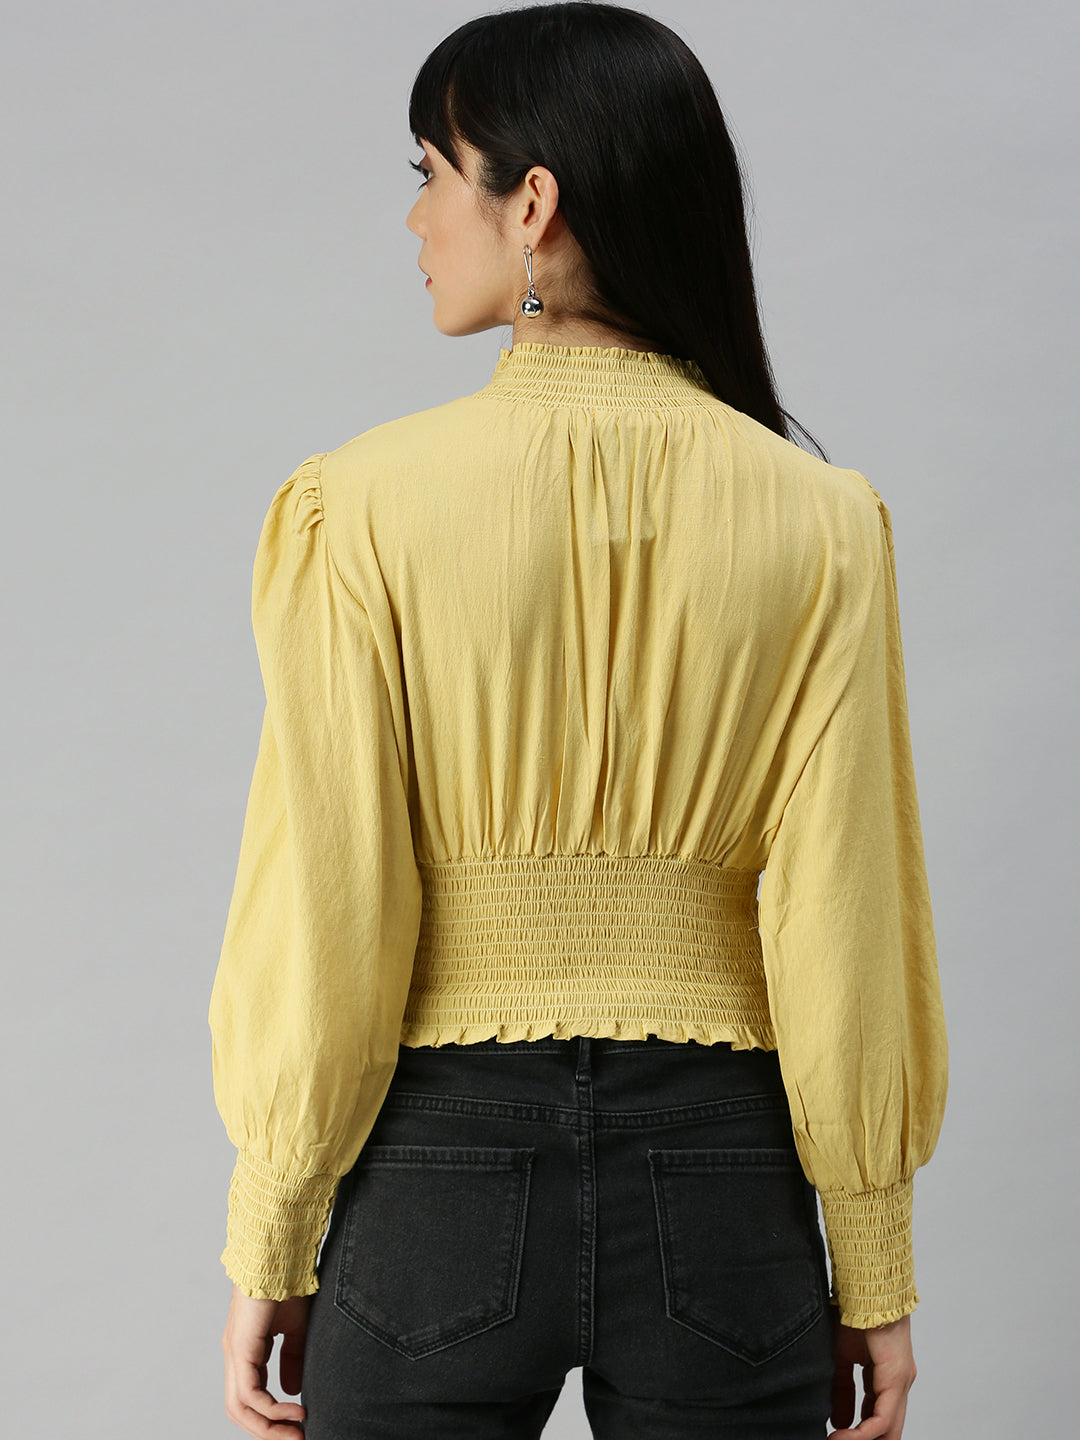 Women High Neck Solid Yellow Cinched Waist Top